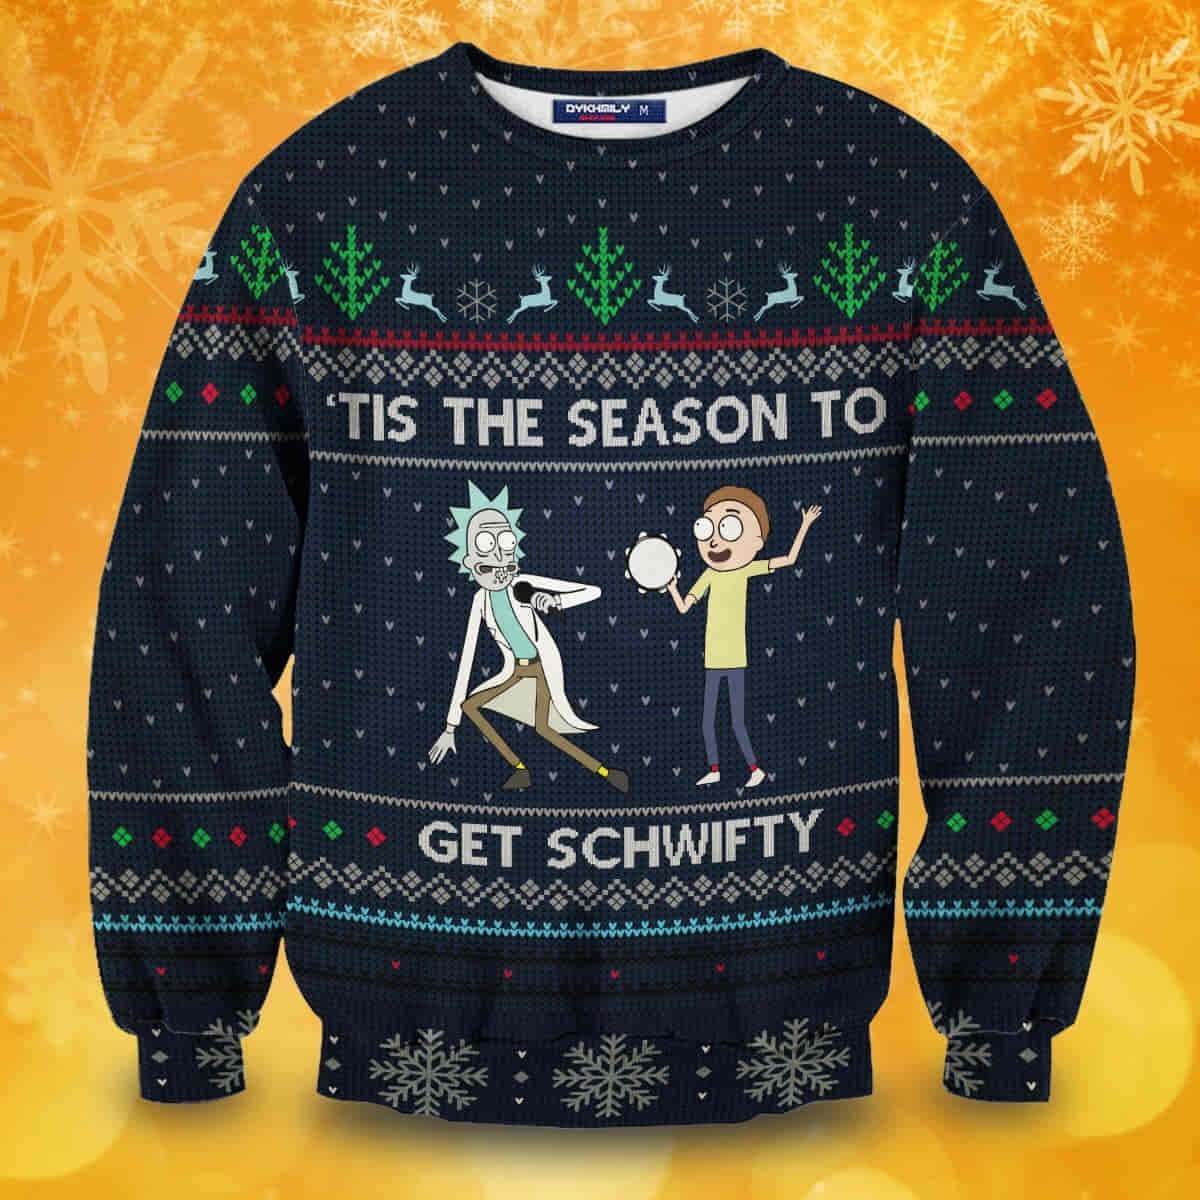 Schwifty Christmas Wool Knitted Sweater, Rick And Morty Tis The Season